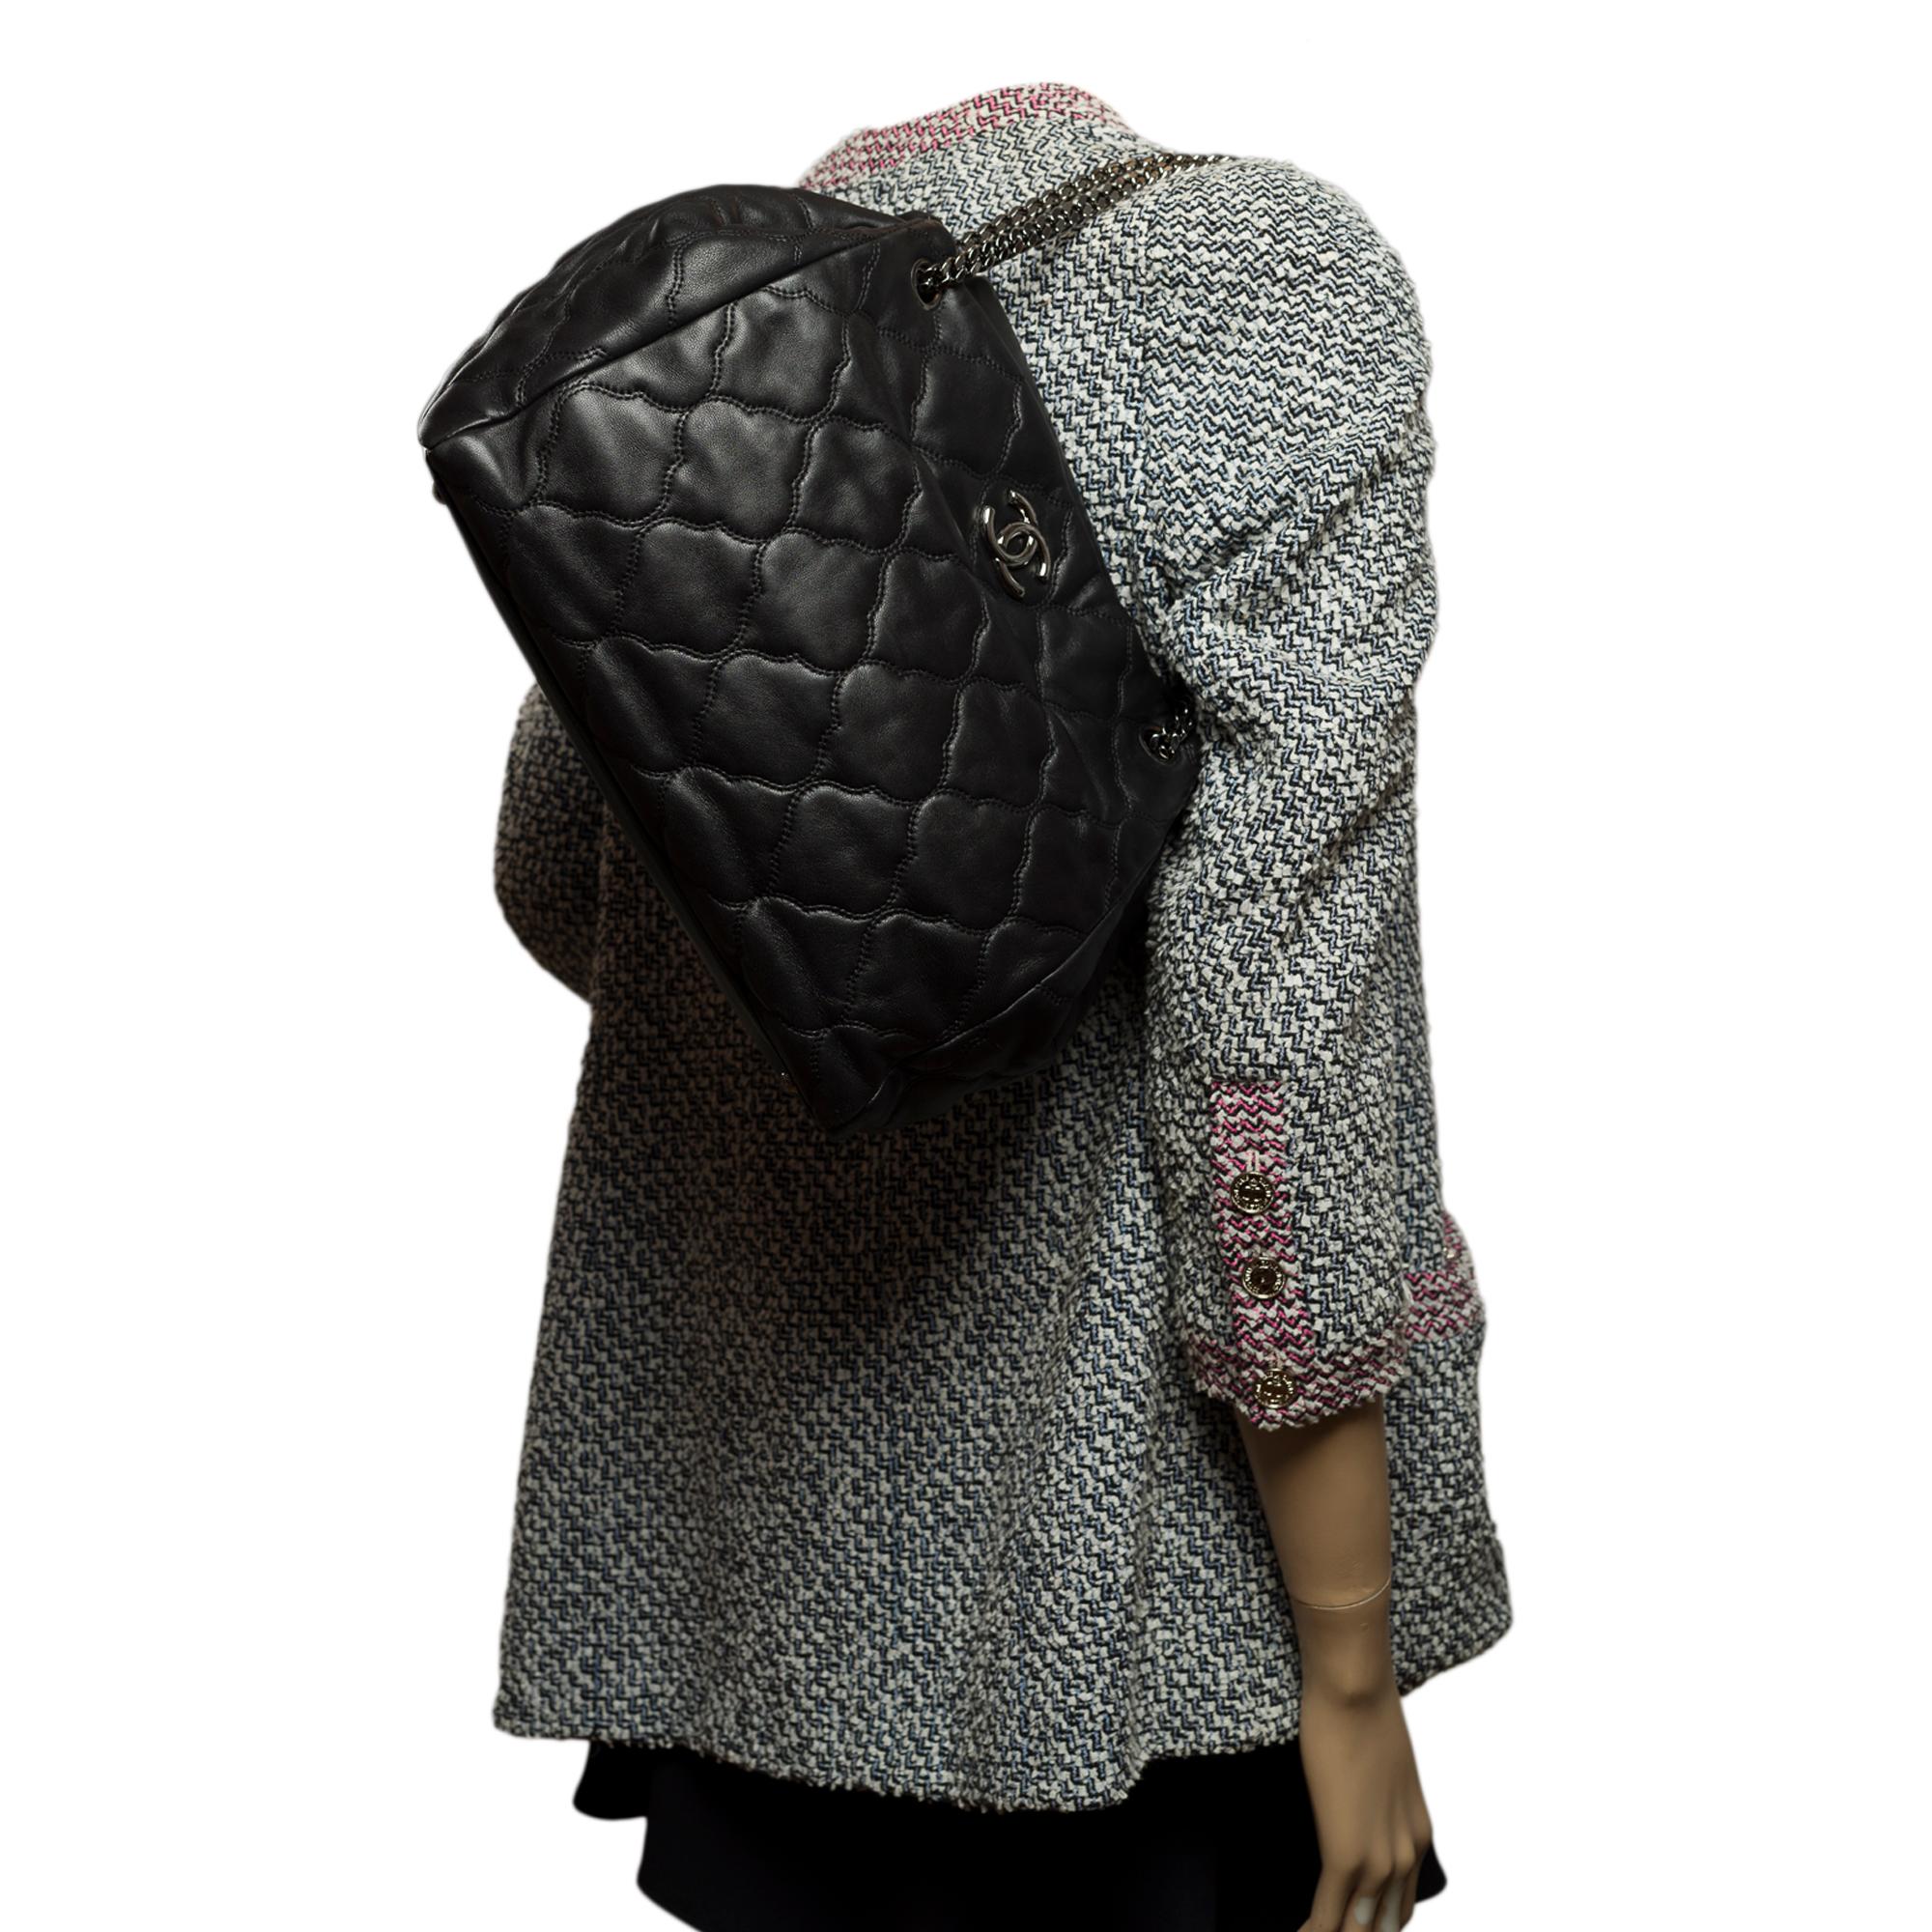 Amazing Chanel Hamptons shopping puffy bag in black quilted leather, SHW 5